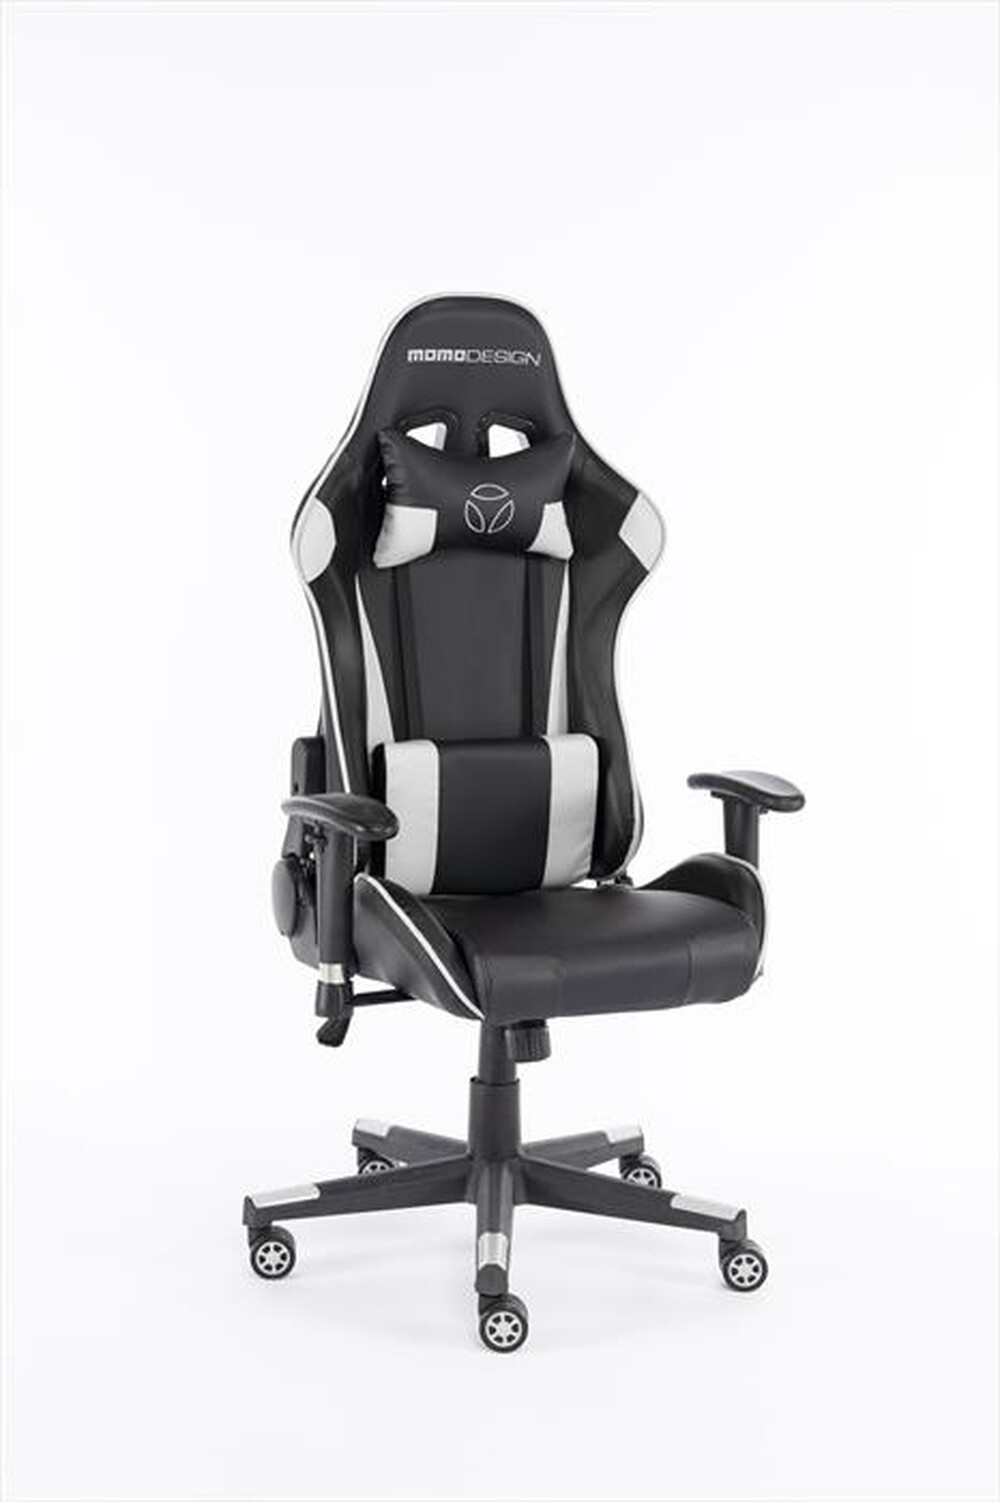 "MOMODESIGN - MD-GC005A-KW CHAIR GAMING - WHITE/BLACK"